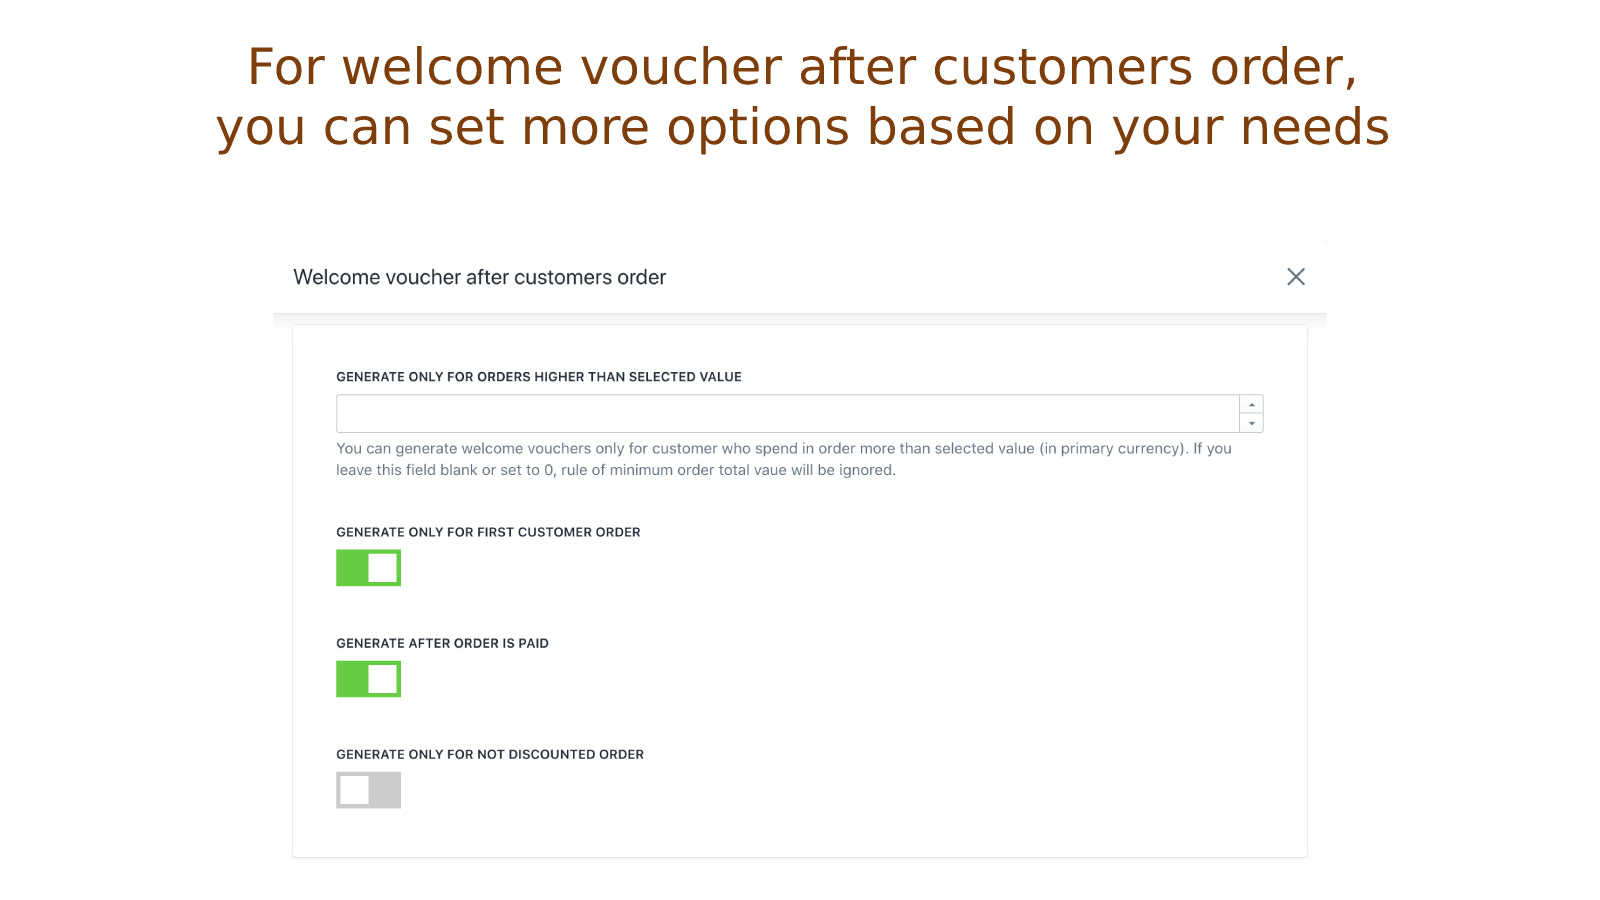 Additional options for welcome voucher after customers order